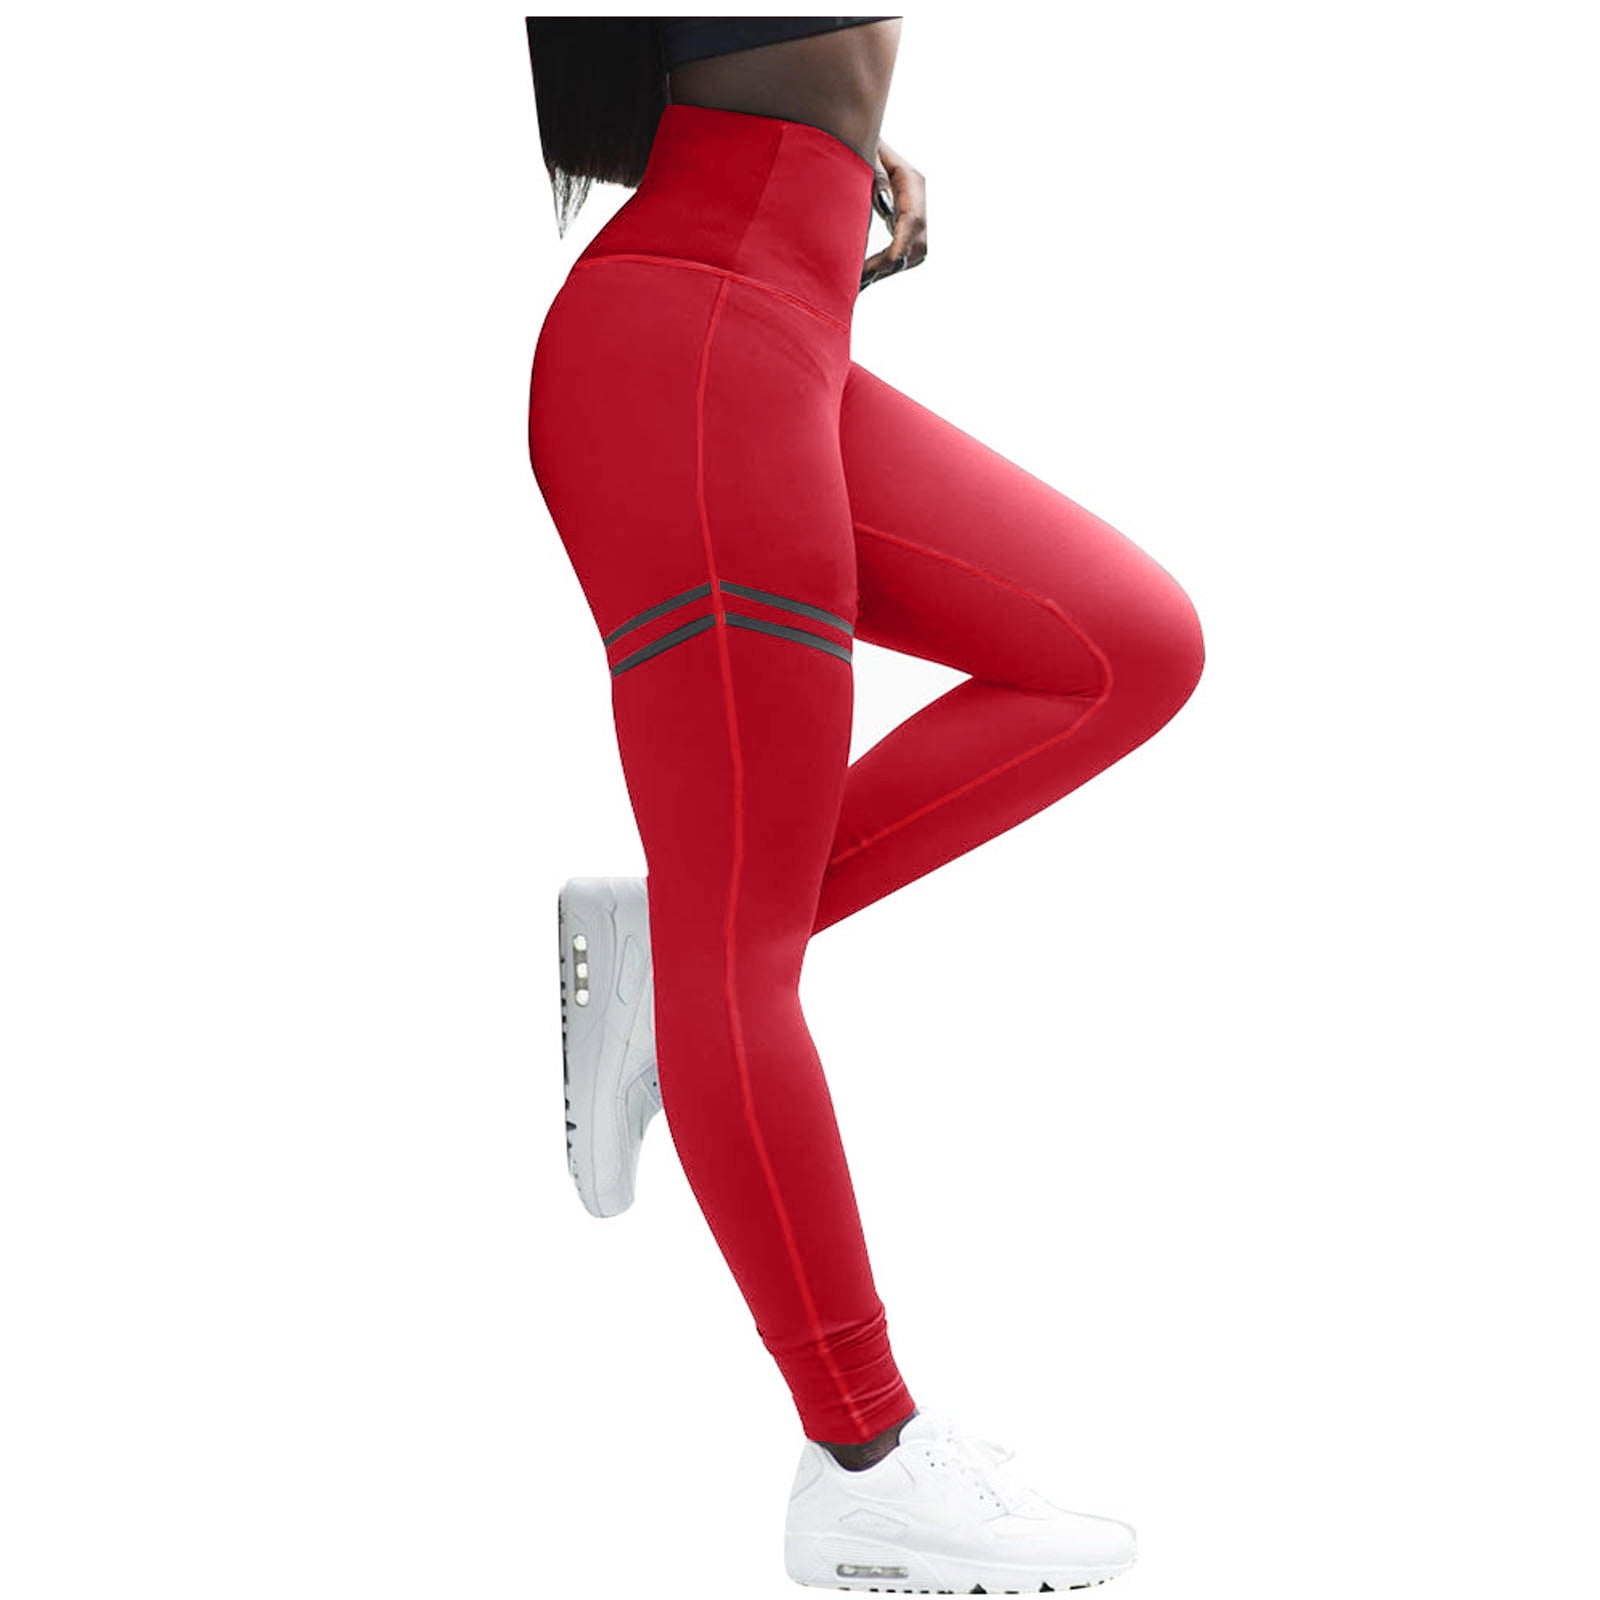 High Waisted Leggings for Women-Womens Black Seamless Workout Leggings  Running Tummy Control Yoga Pants(1 Pack Red L-XL)